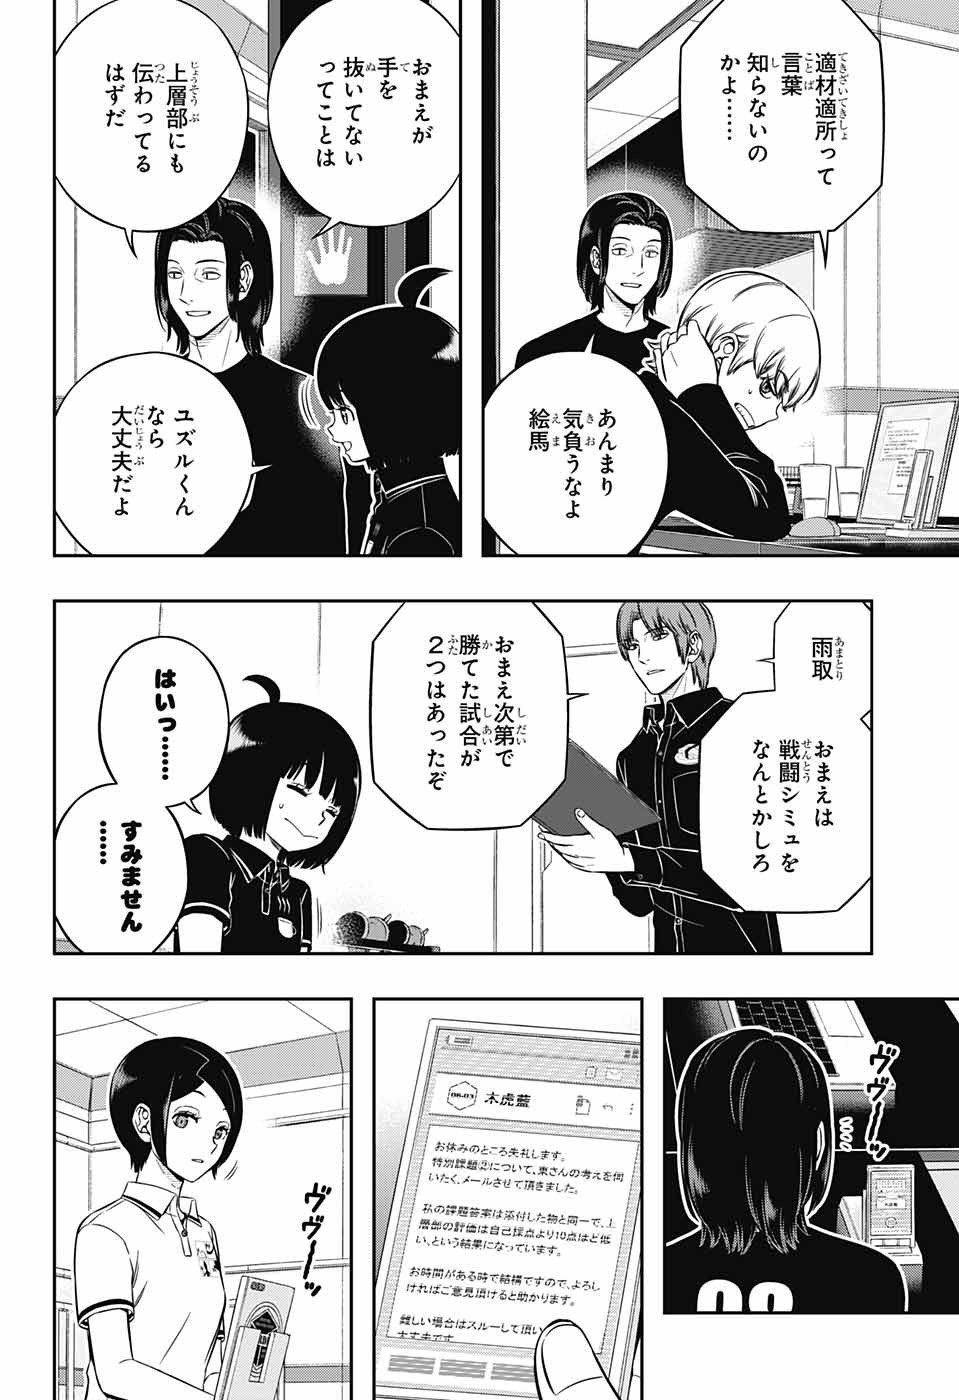 World Trigger - Chapter 221 - Page 2